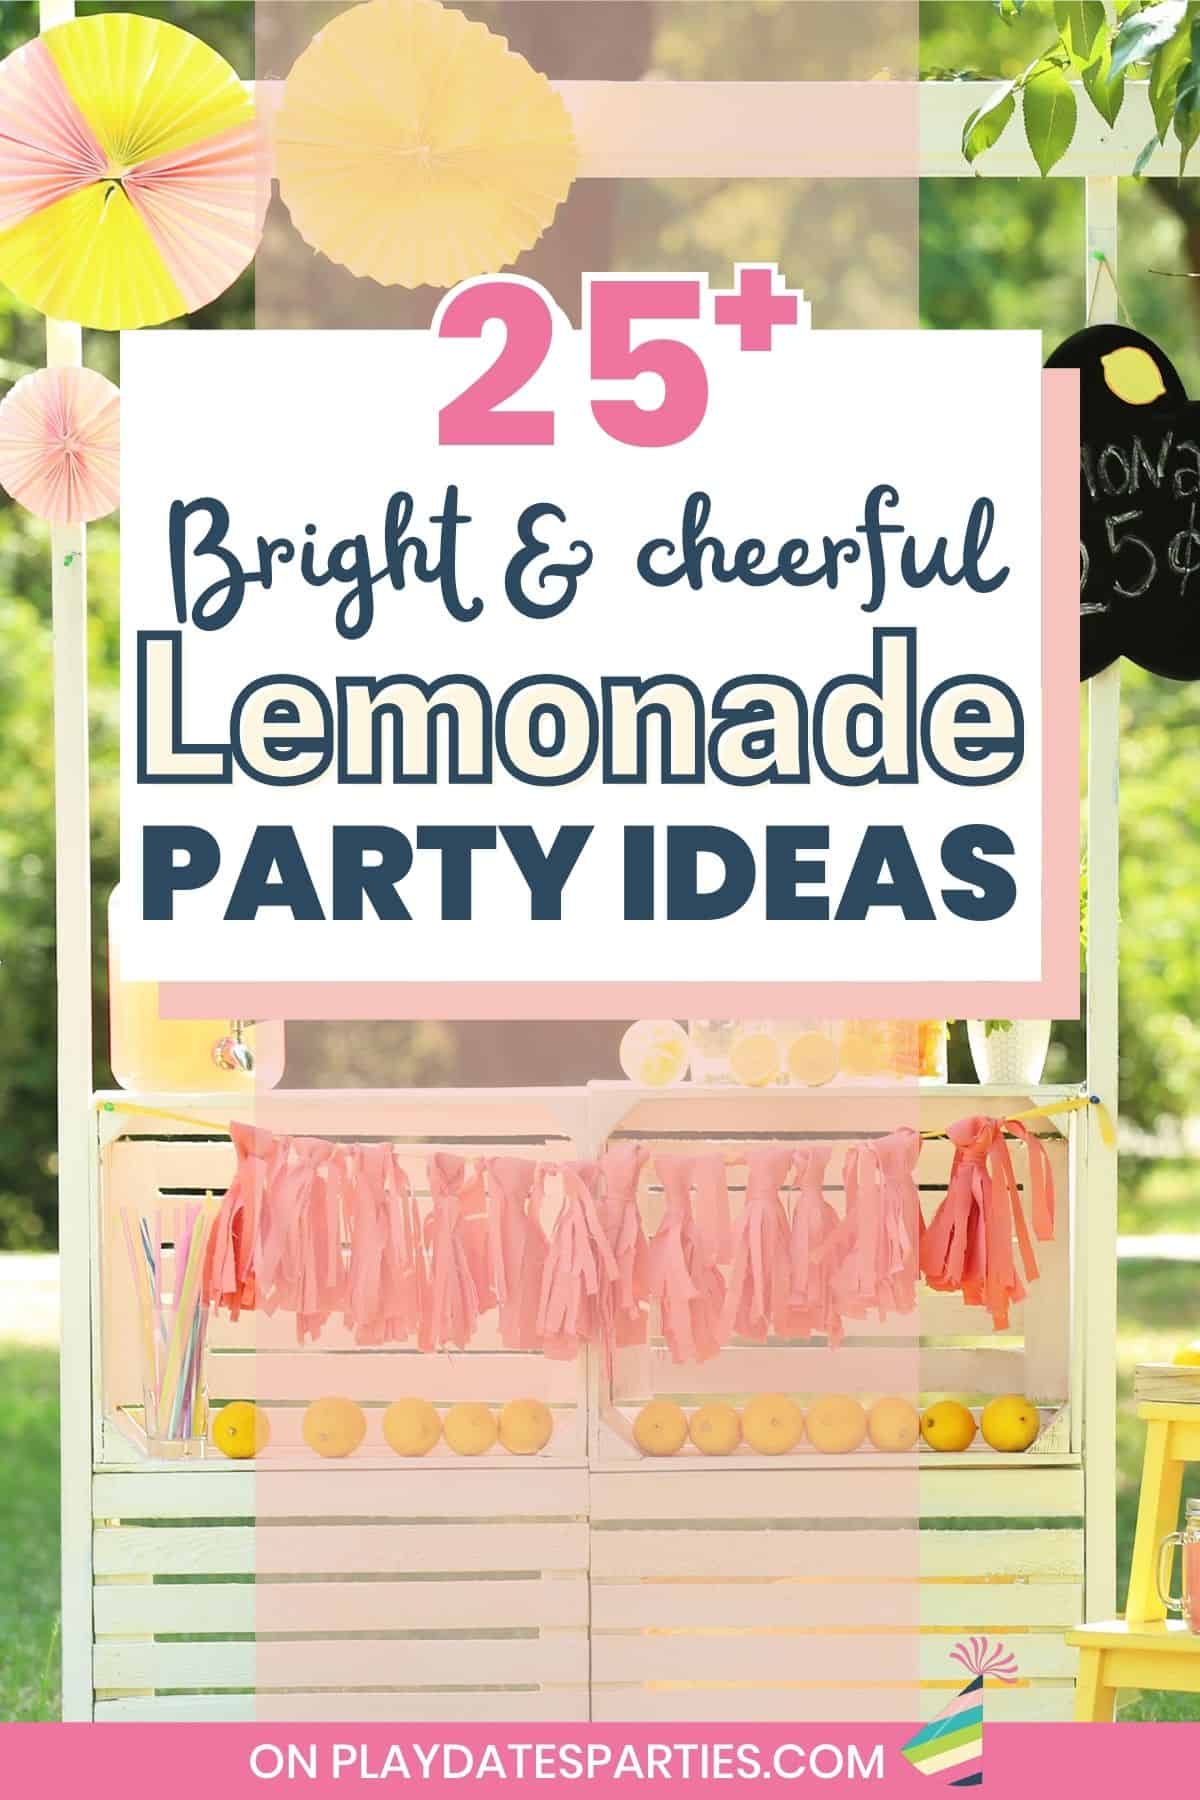 Photo of a lemonade stand with text overlay 25 plus bright and cheerful lemonade party ideas.